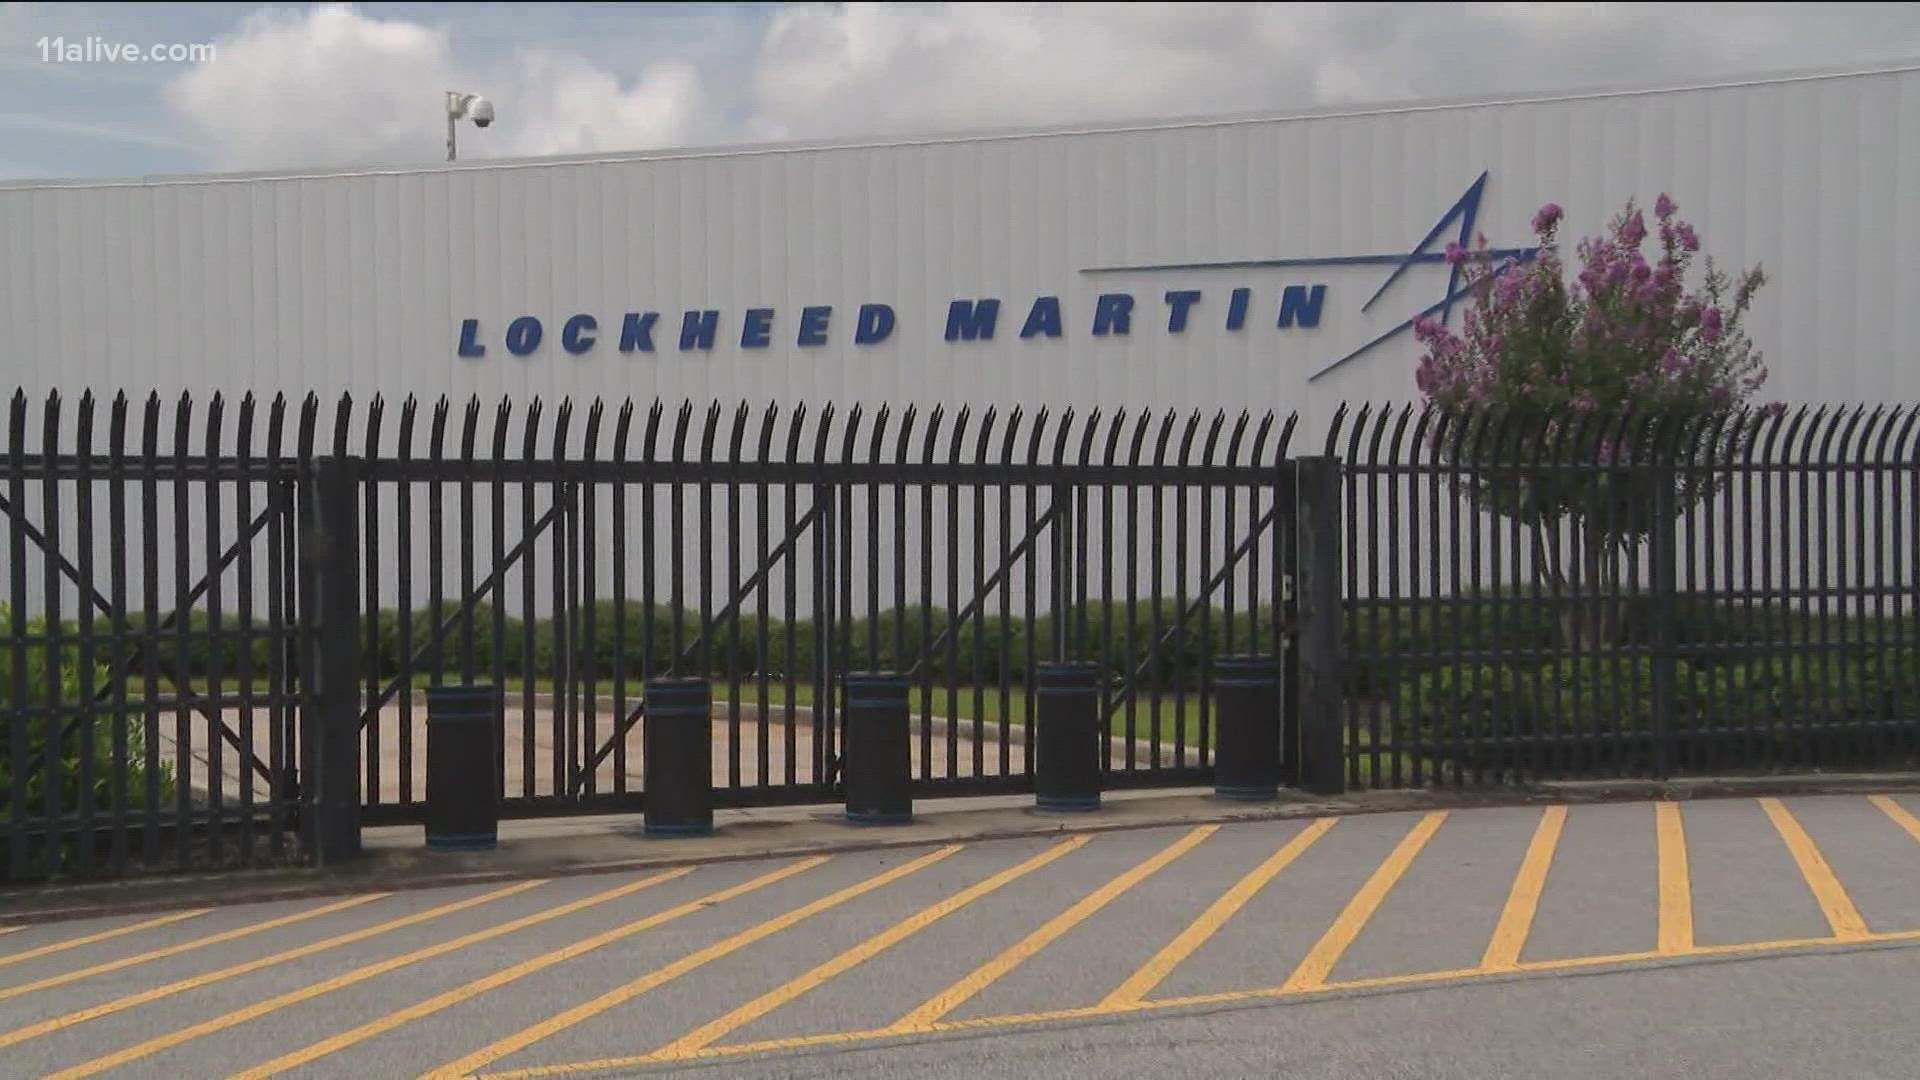 Gov. Brian Kemp and the First Lady toured Lockheed Martin facility, where the governor said 150 new jobs were added after a bill passed earlier this year.